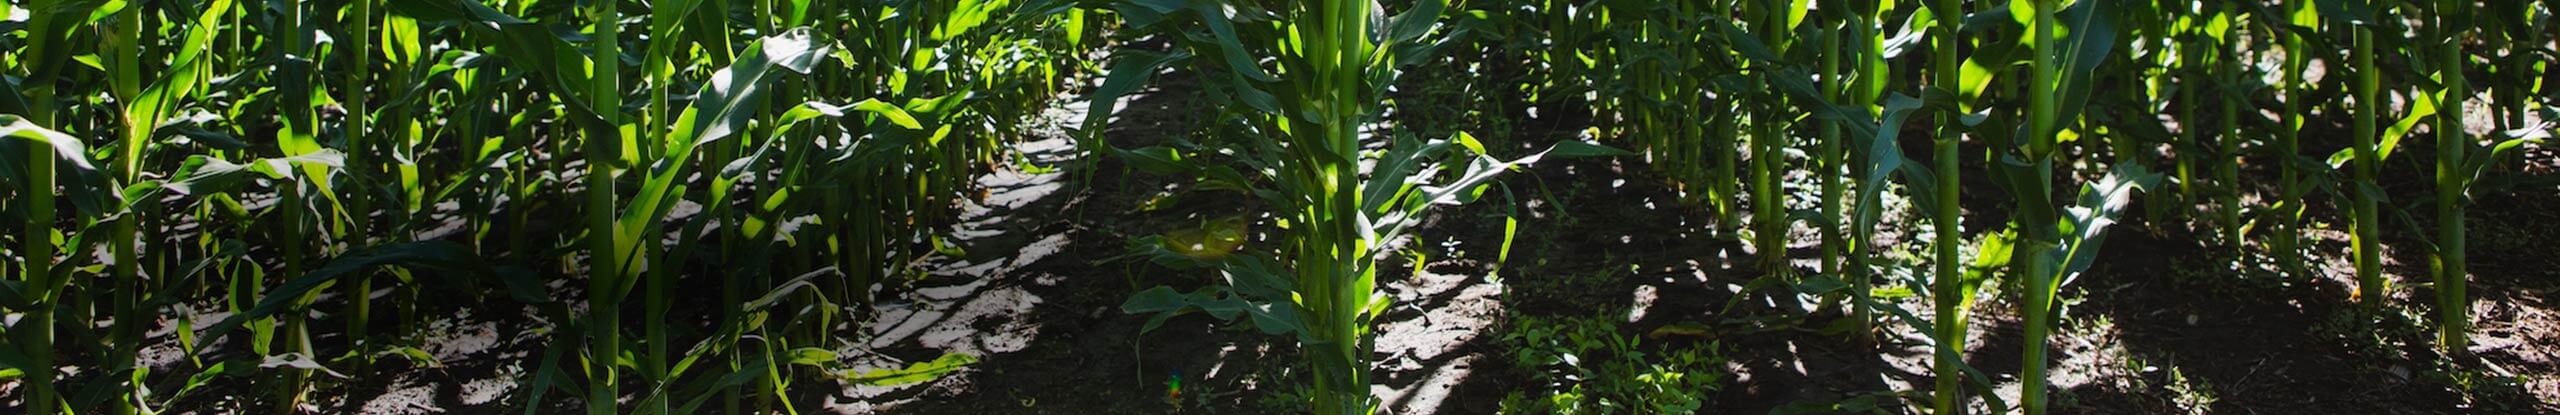 Corn Planting Populations: Results from a 3-Year Study